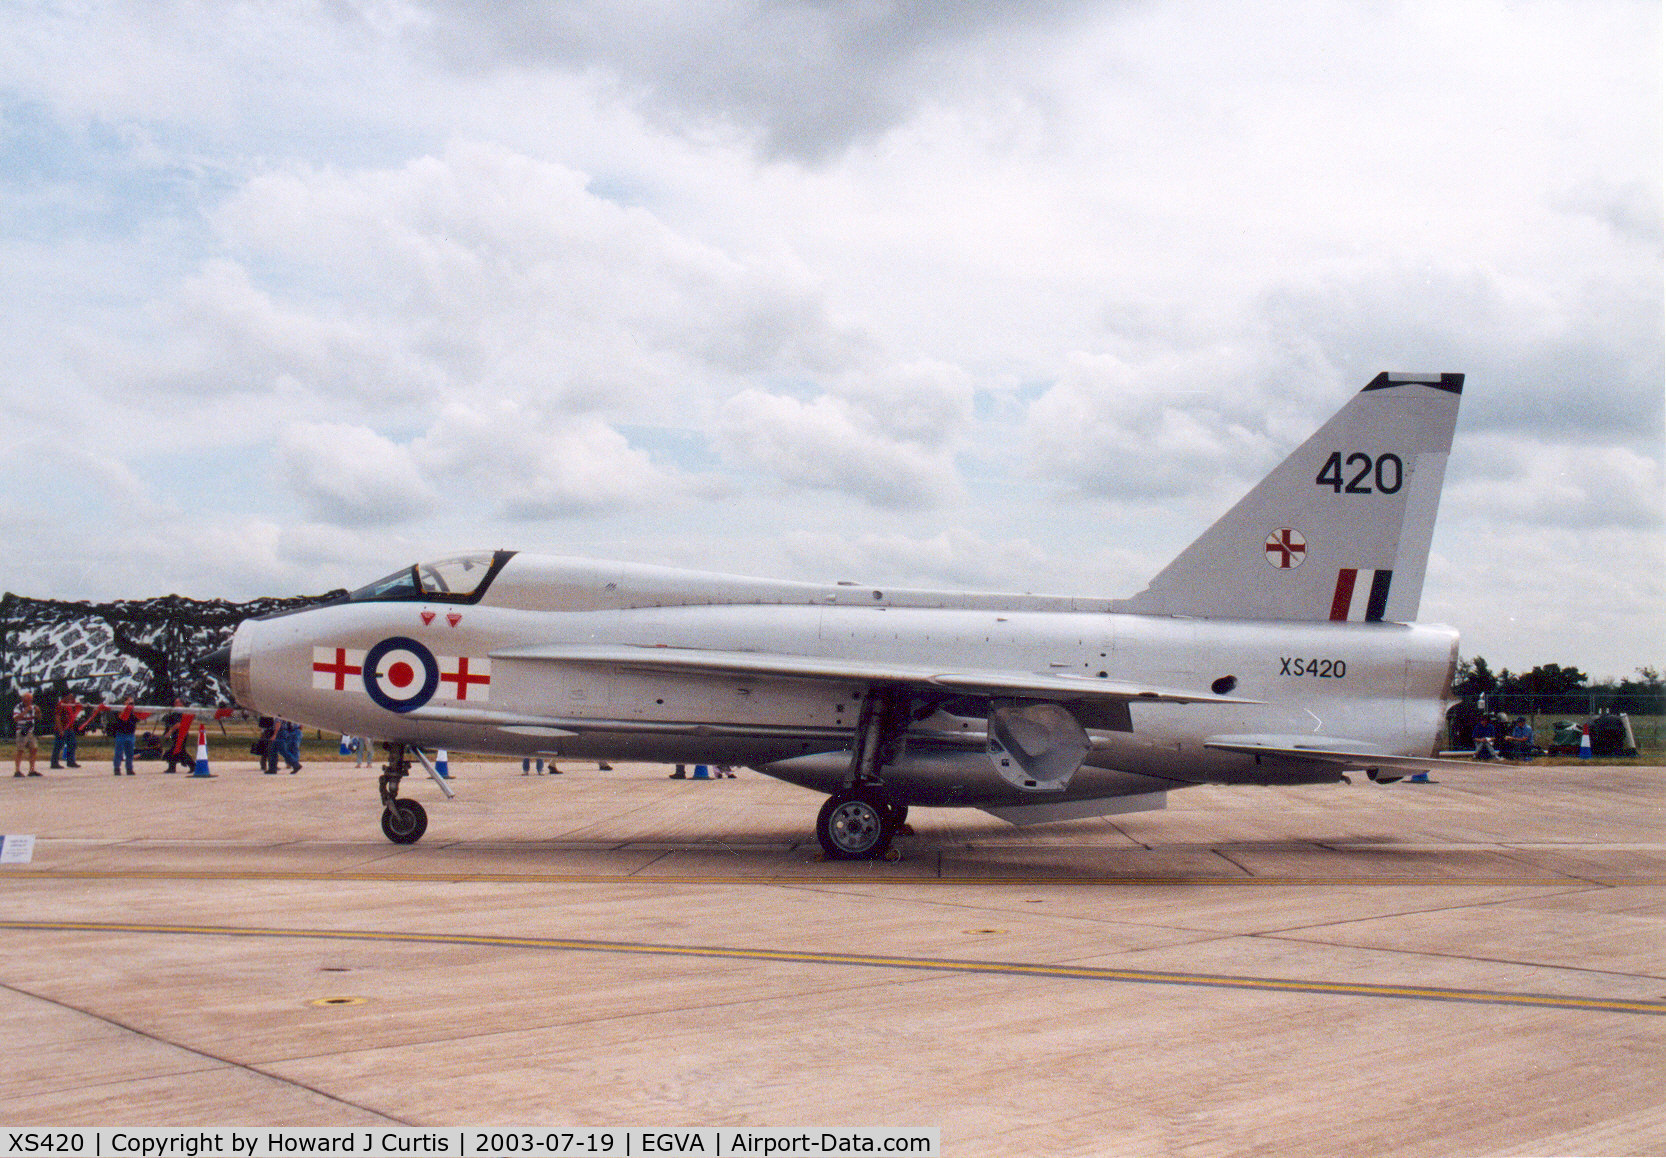 XS420, 1965 English Electric Lightning T.5 C/N 95005, In the static display.